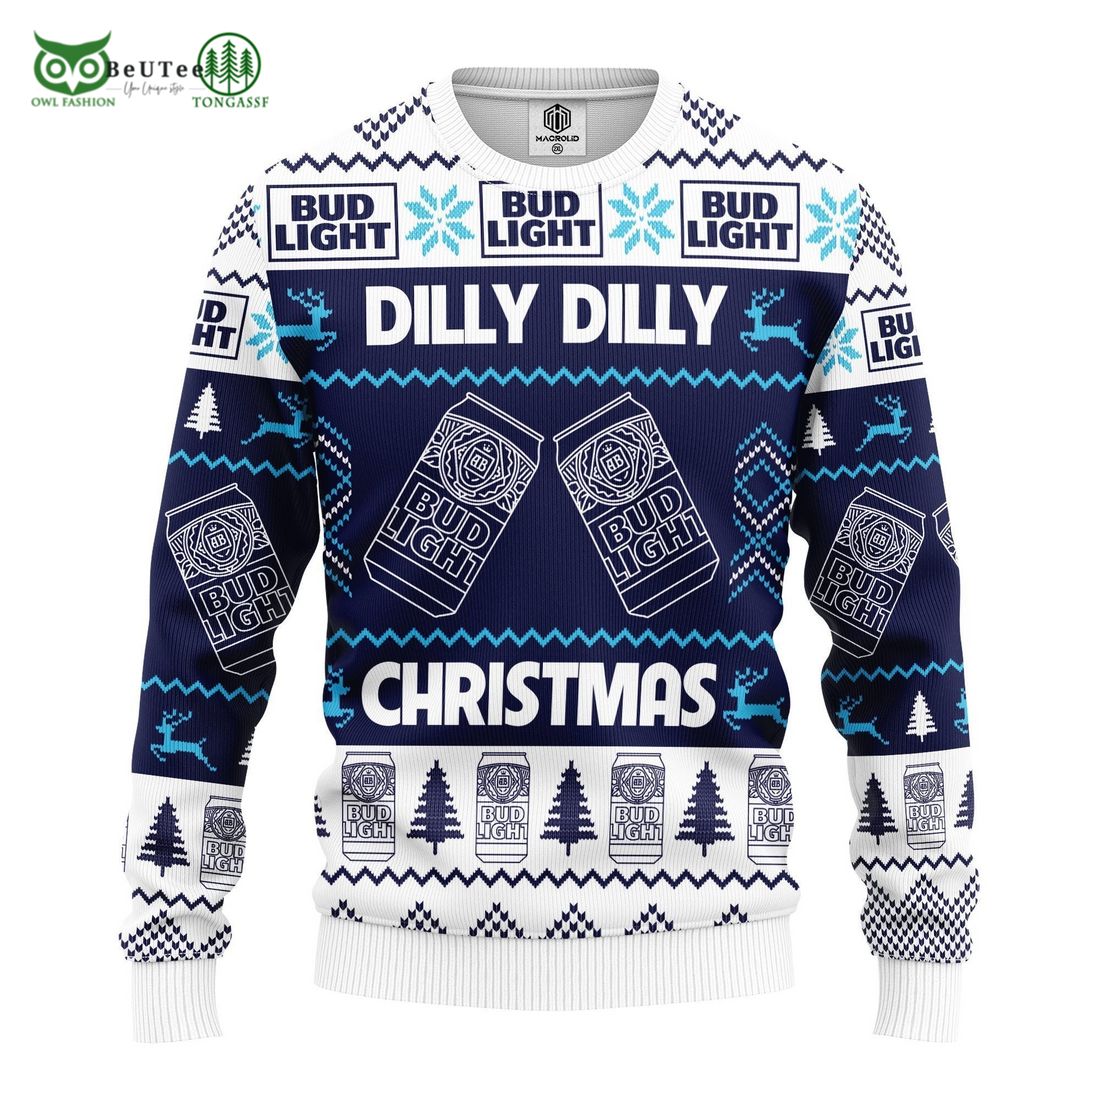 bud light dilly ugly knitted christmas sweater 1 7xreL